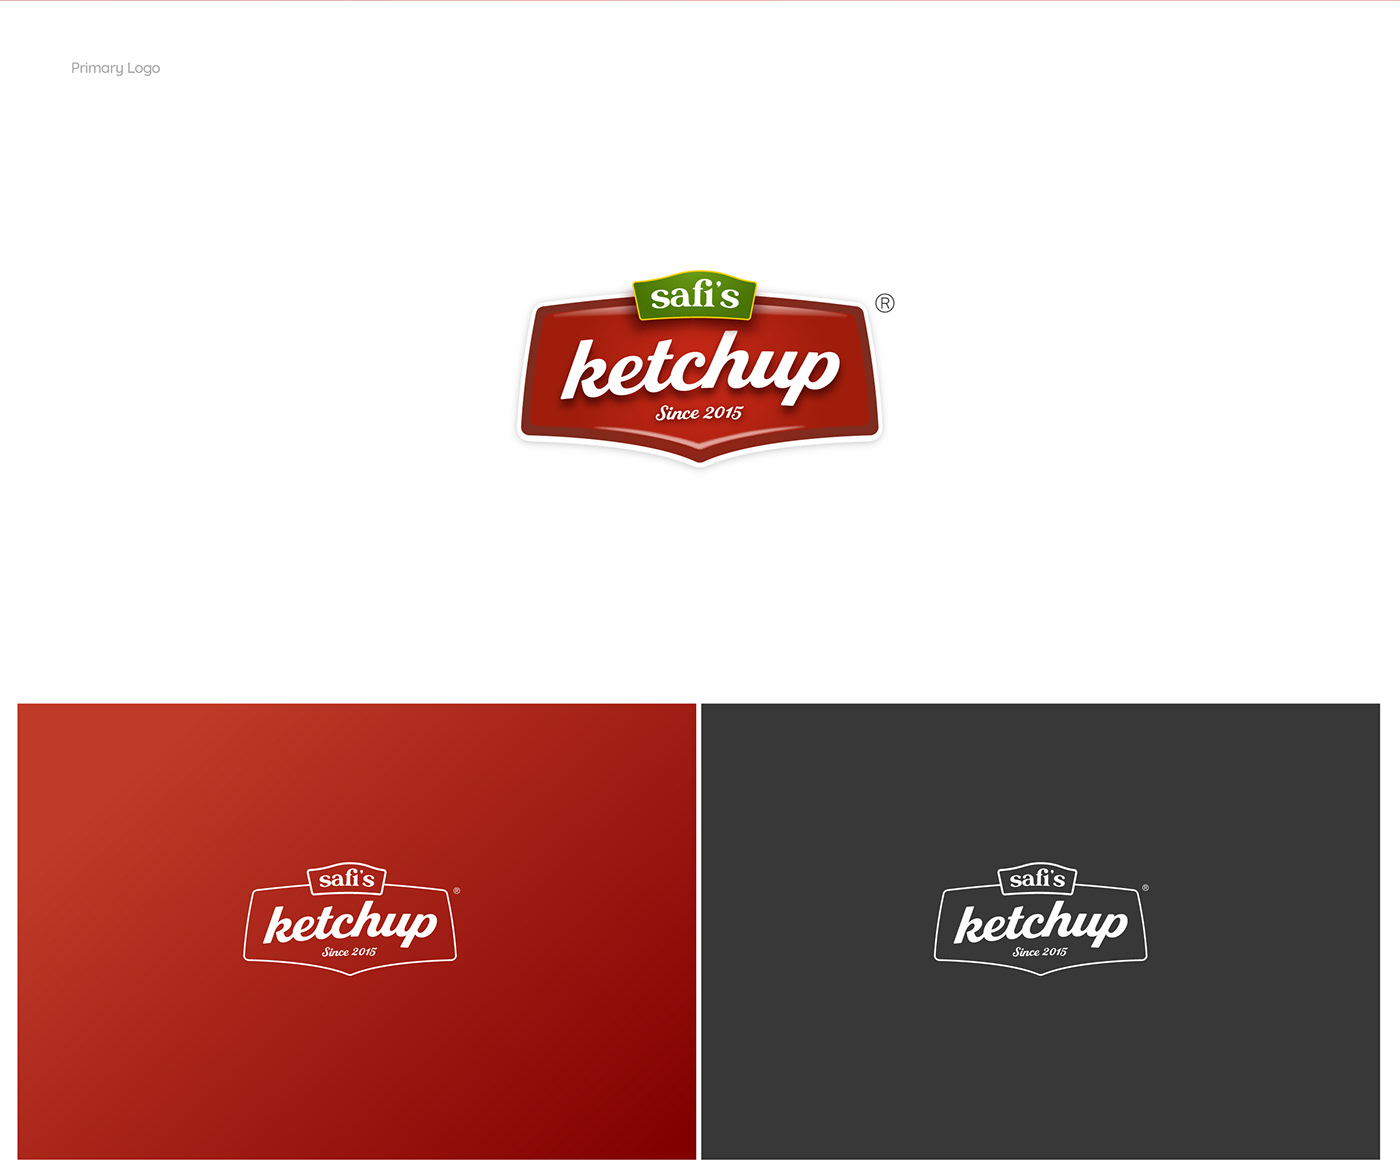 Tomato ketchup heinz Packaging brand identity Logo Design visual identity packaging design logo red